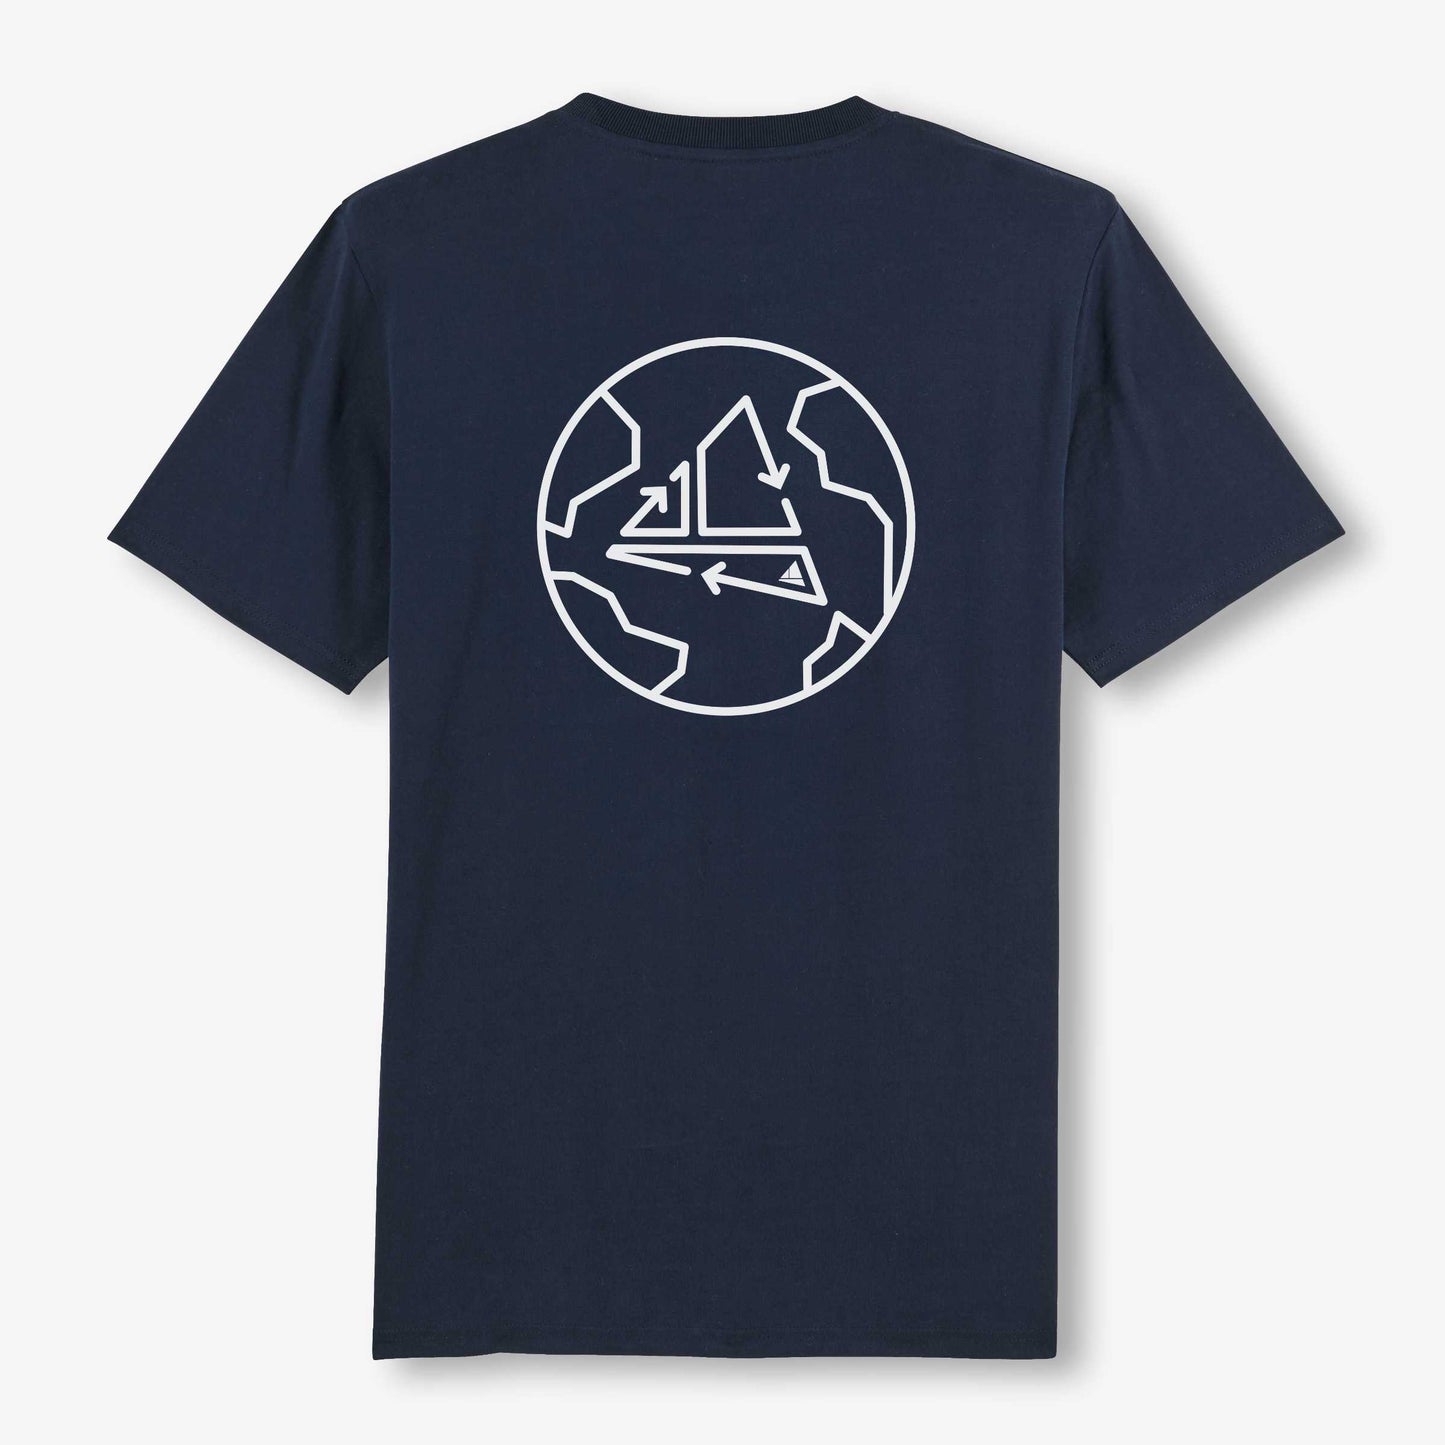 Boat Cove Global Sailing Sustainable T-shirt